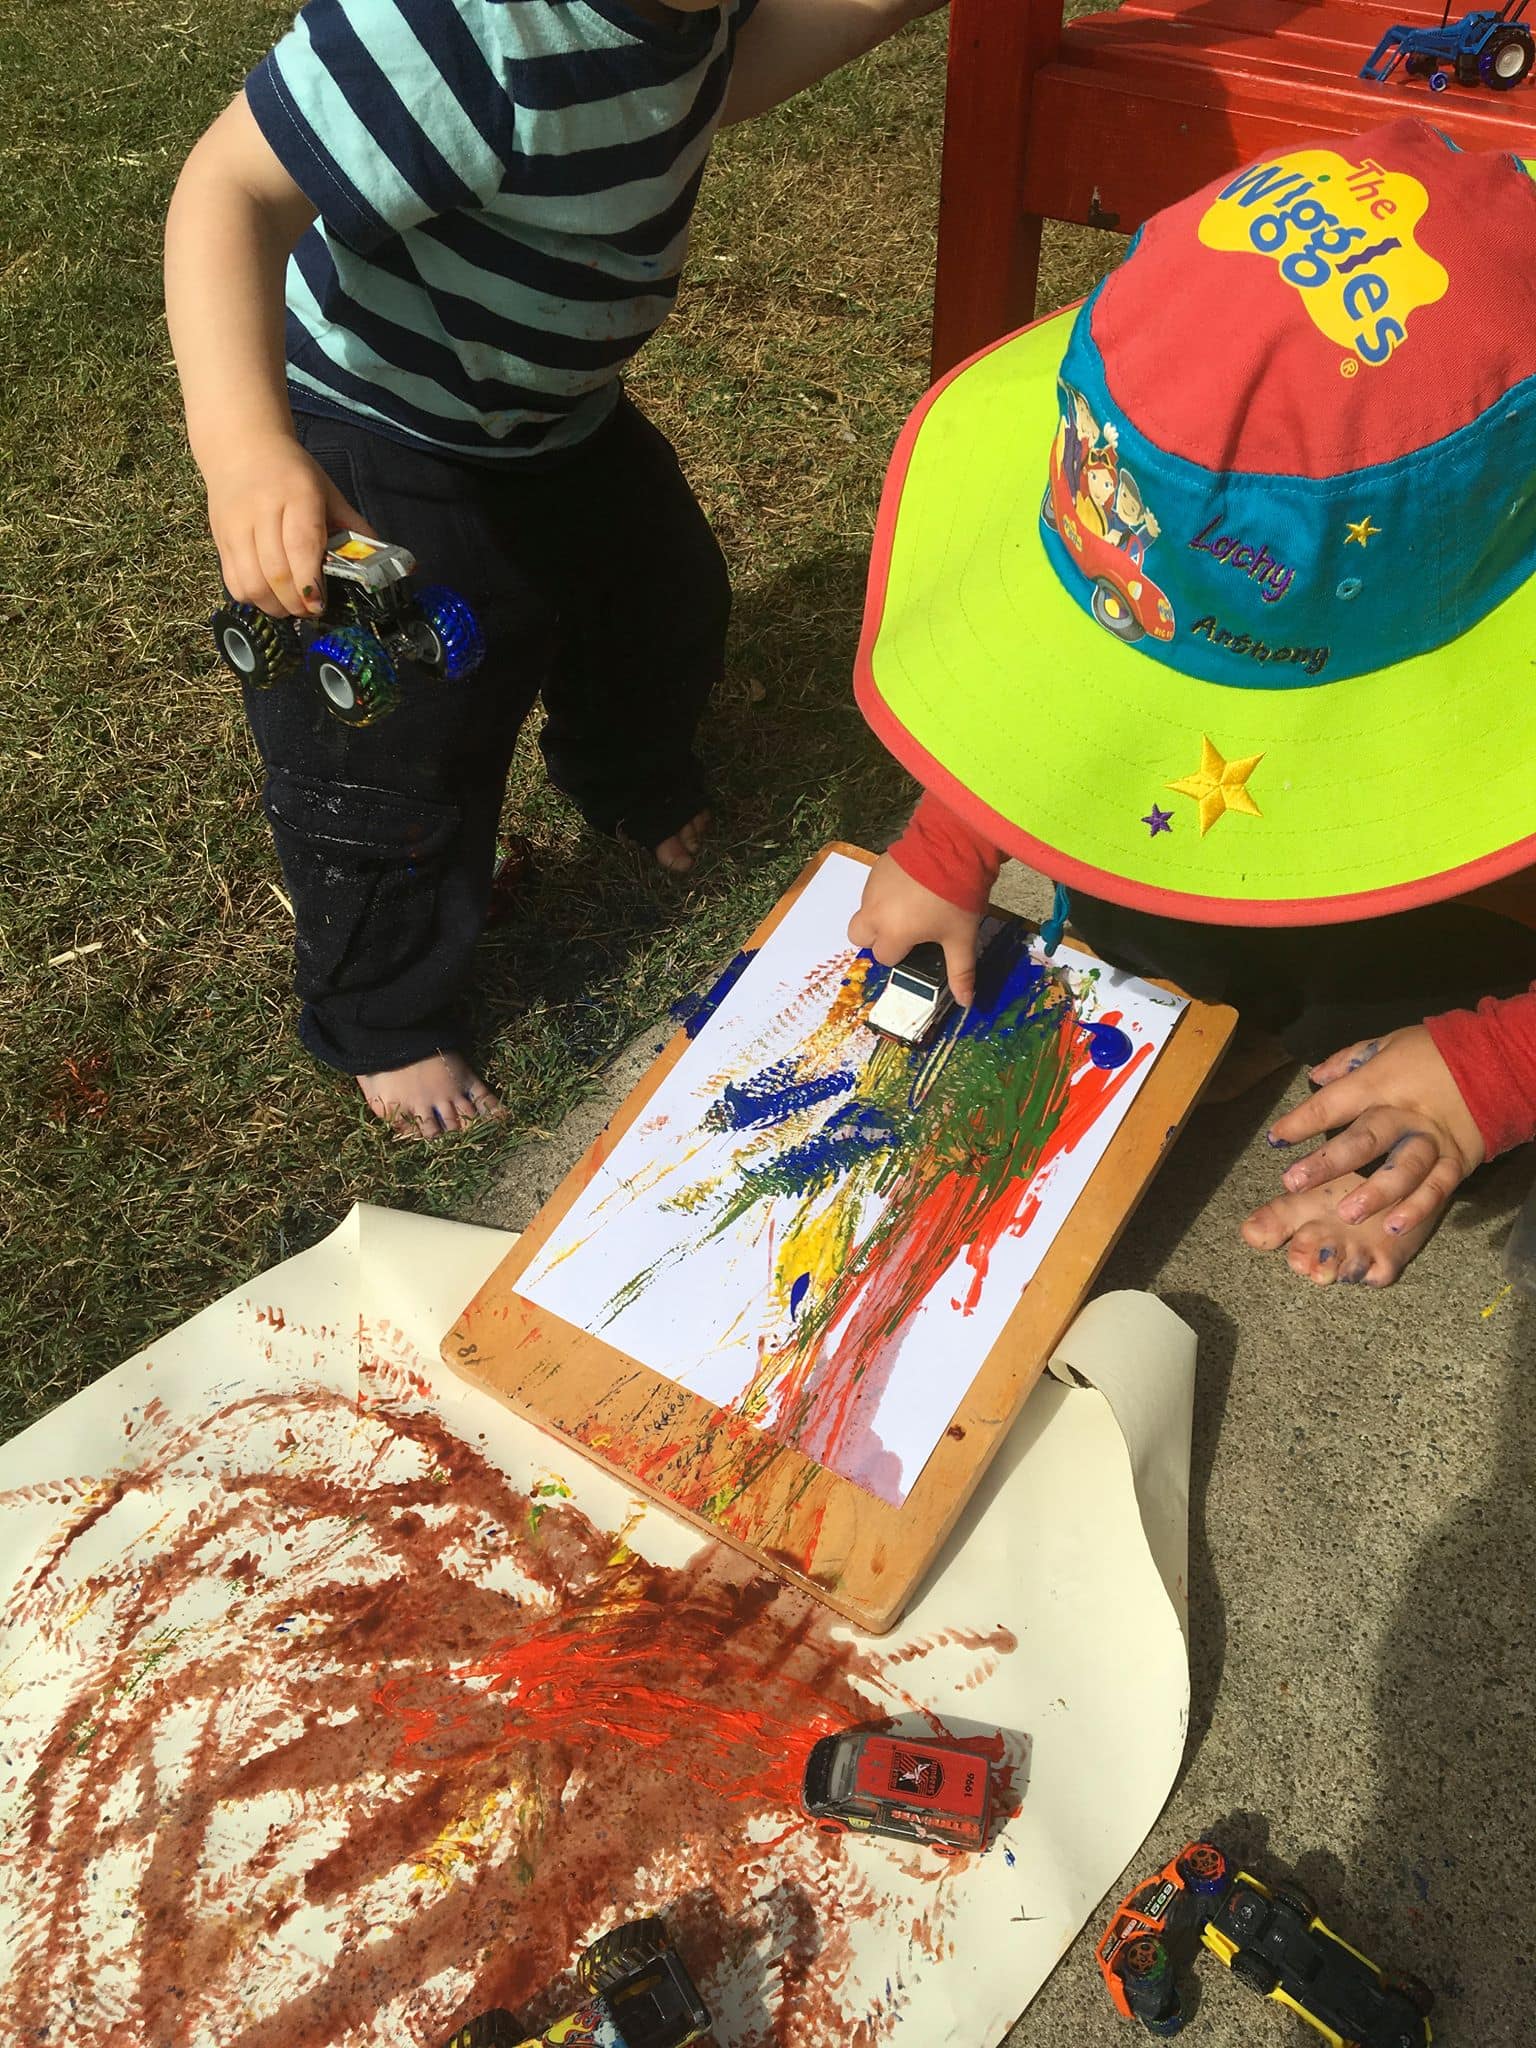 Children love to express their creativity with simple painting activities.  Ignite interest & exploration with these easy ideas & recipes!